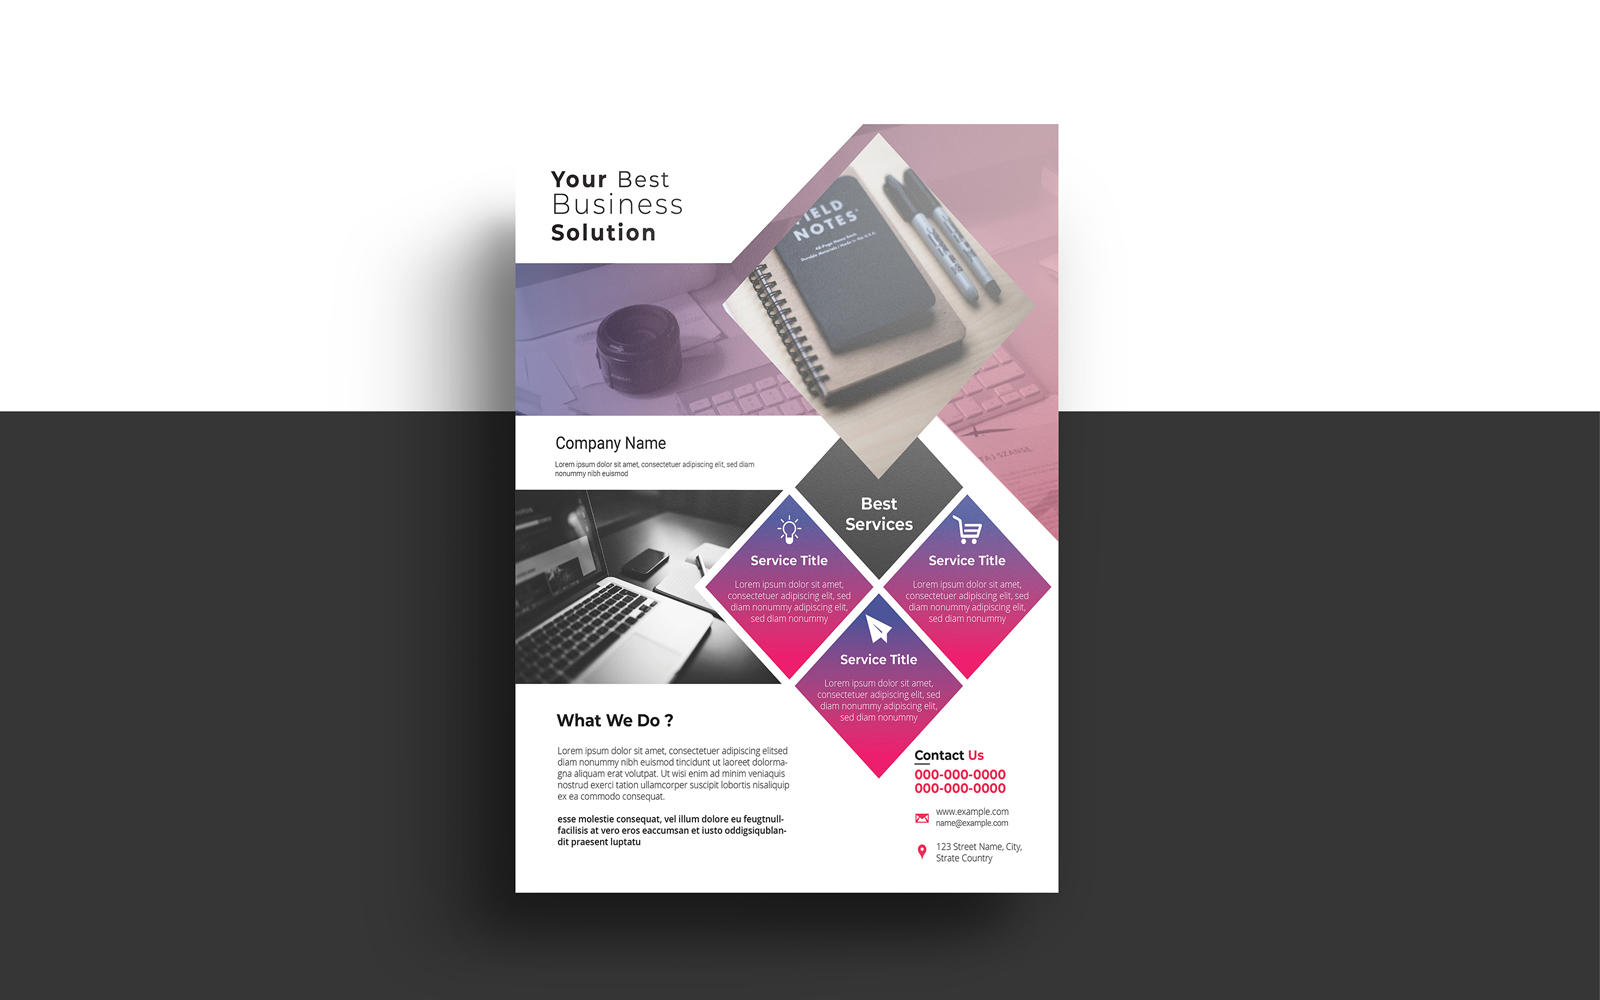 Business Solution Flyer Corporate Identity Template